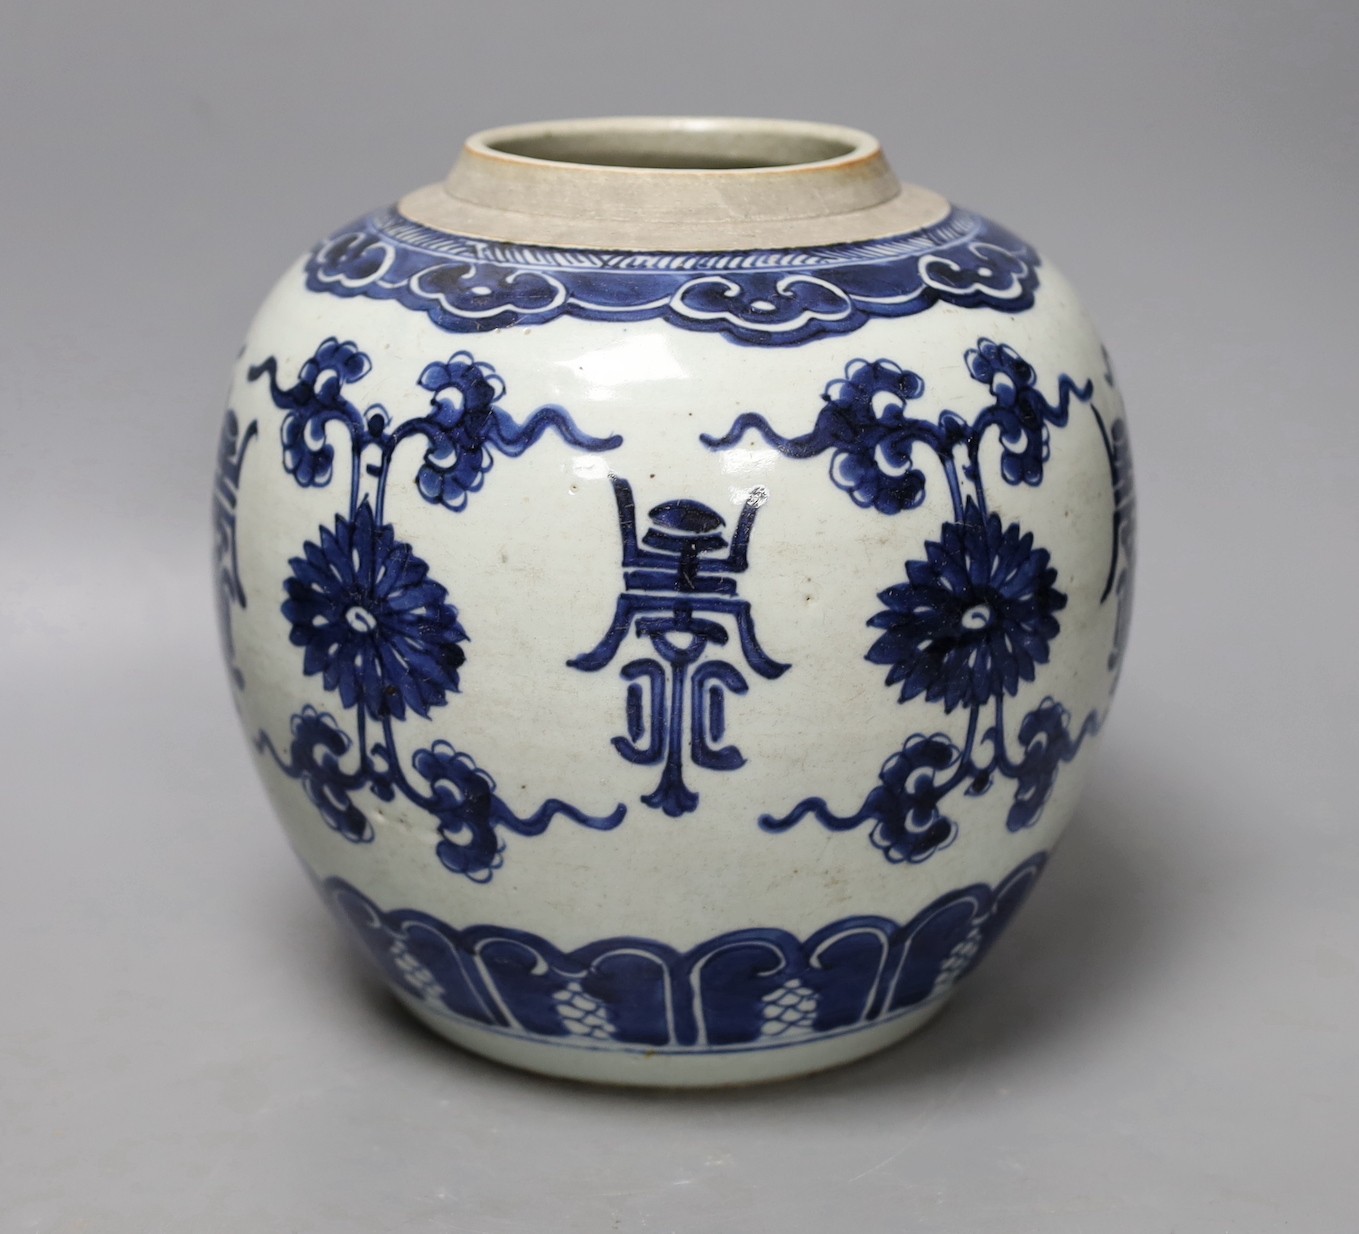 An 18th century Chinese blue and white jar, painted with ‘shou’, flowers and tendrils, 22cm high